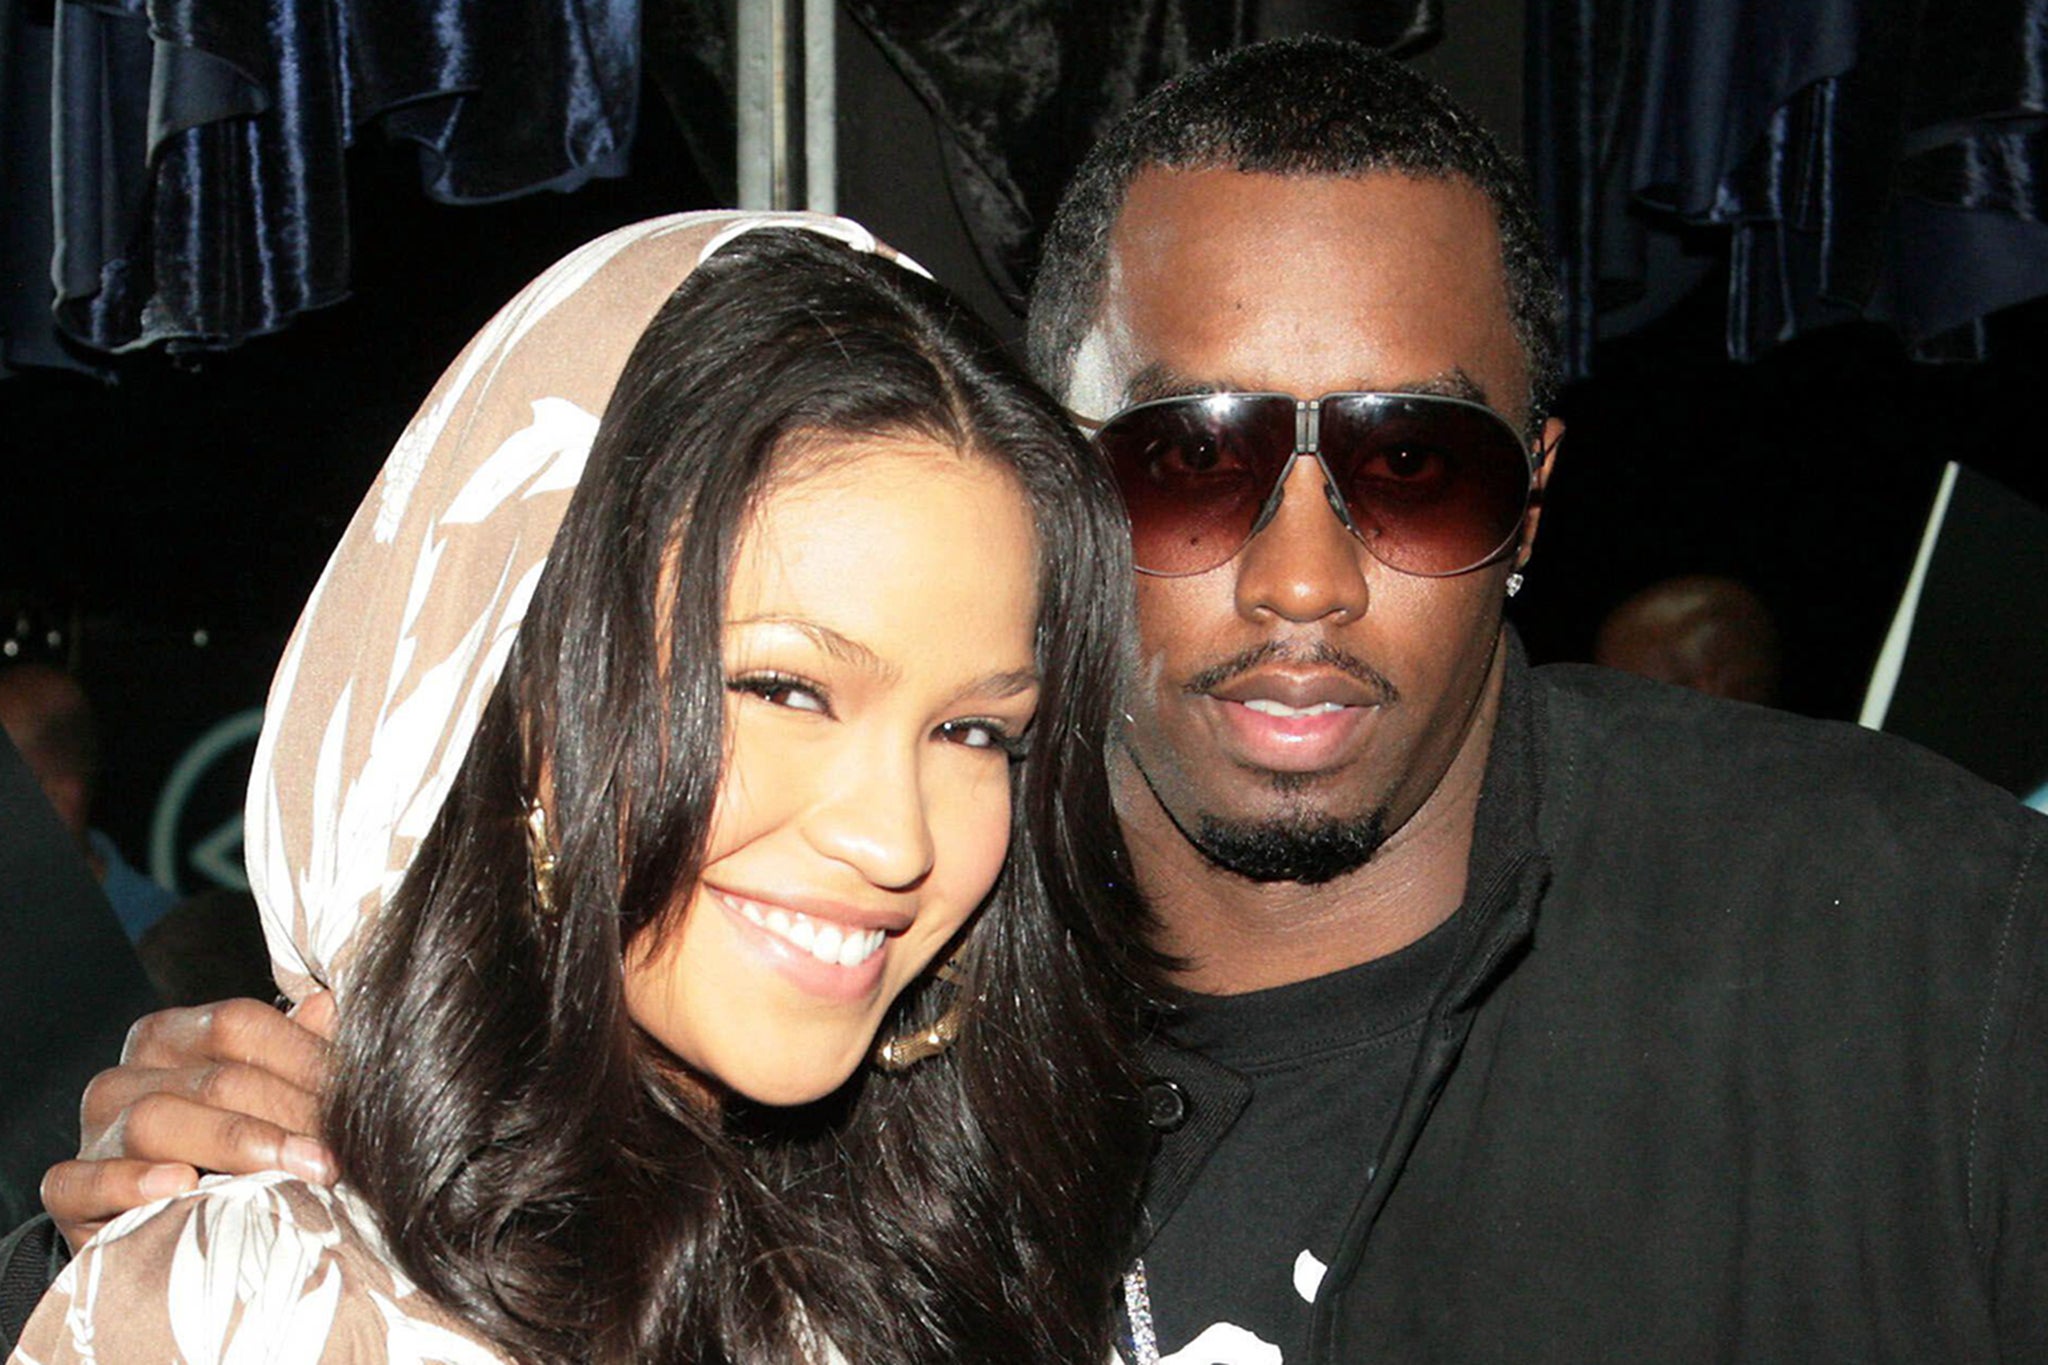 Sean ‘Diddy’ Combs and former girlfriend Casandra ‘Cassie’ Ventura in 2006. Ms Ventura filed a lawsuit against the rapper last year accusing him of trafficking, raping and beating her on many occasions over 10 years